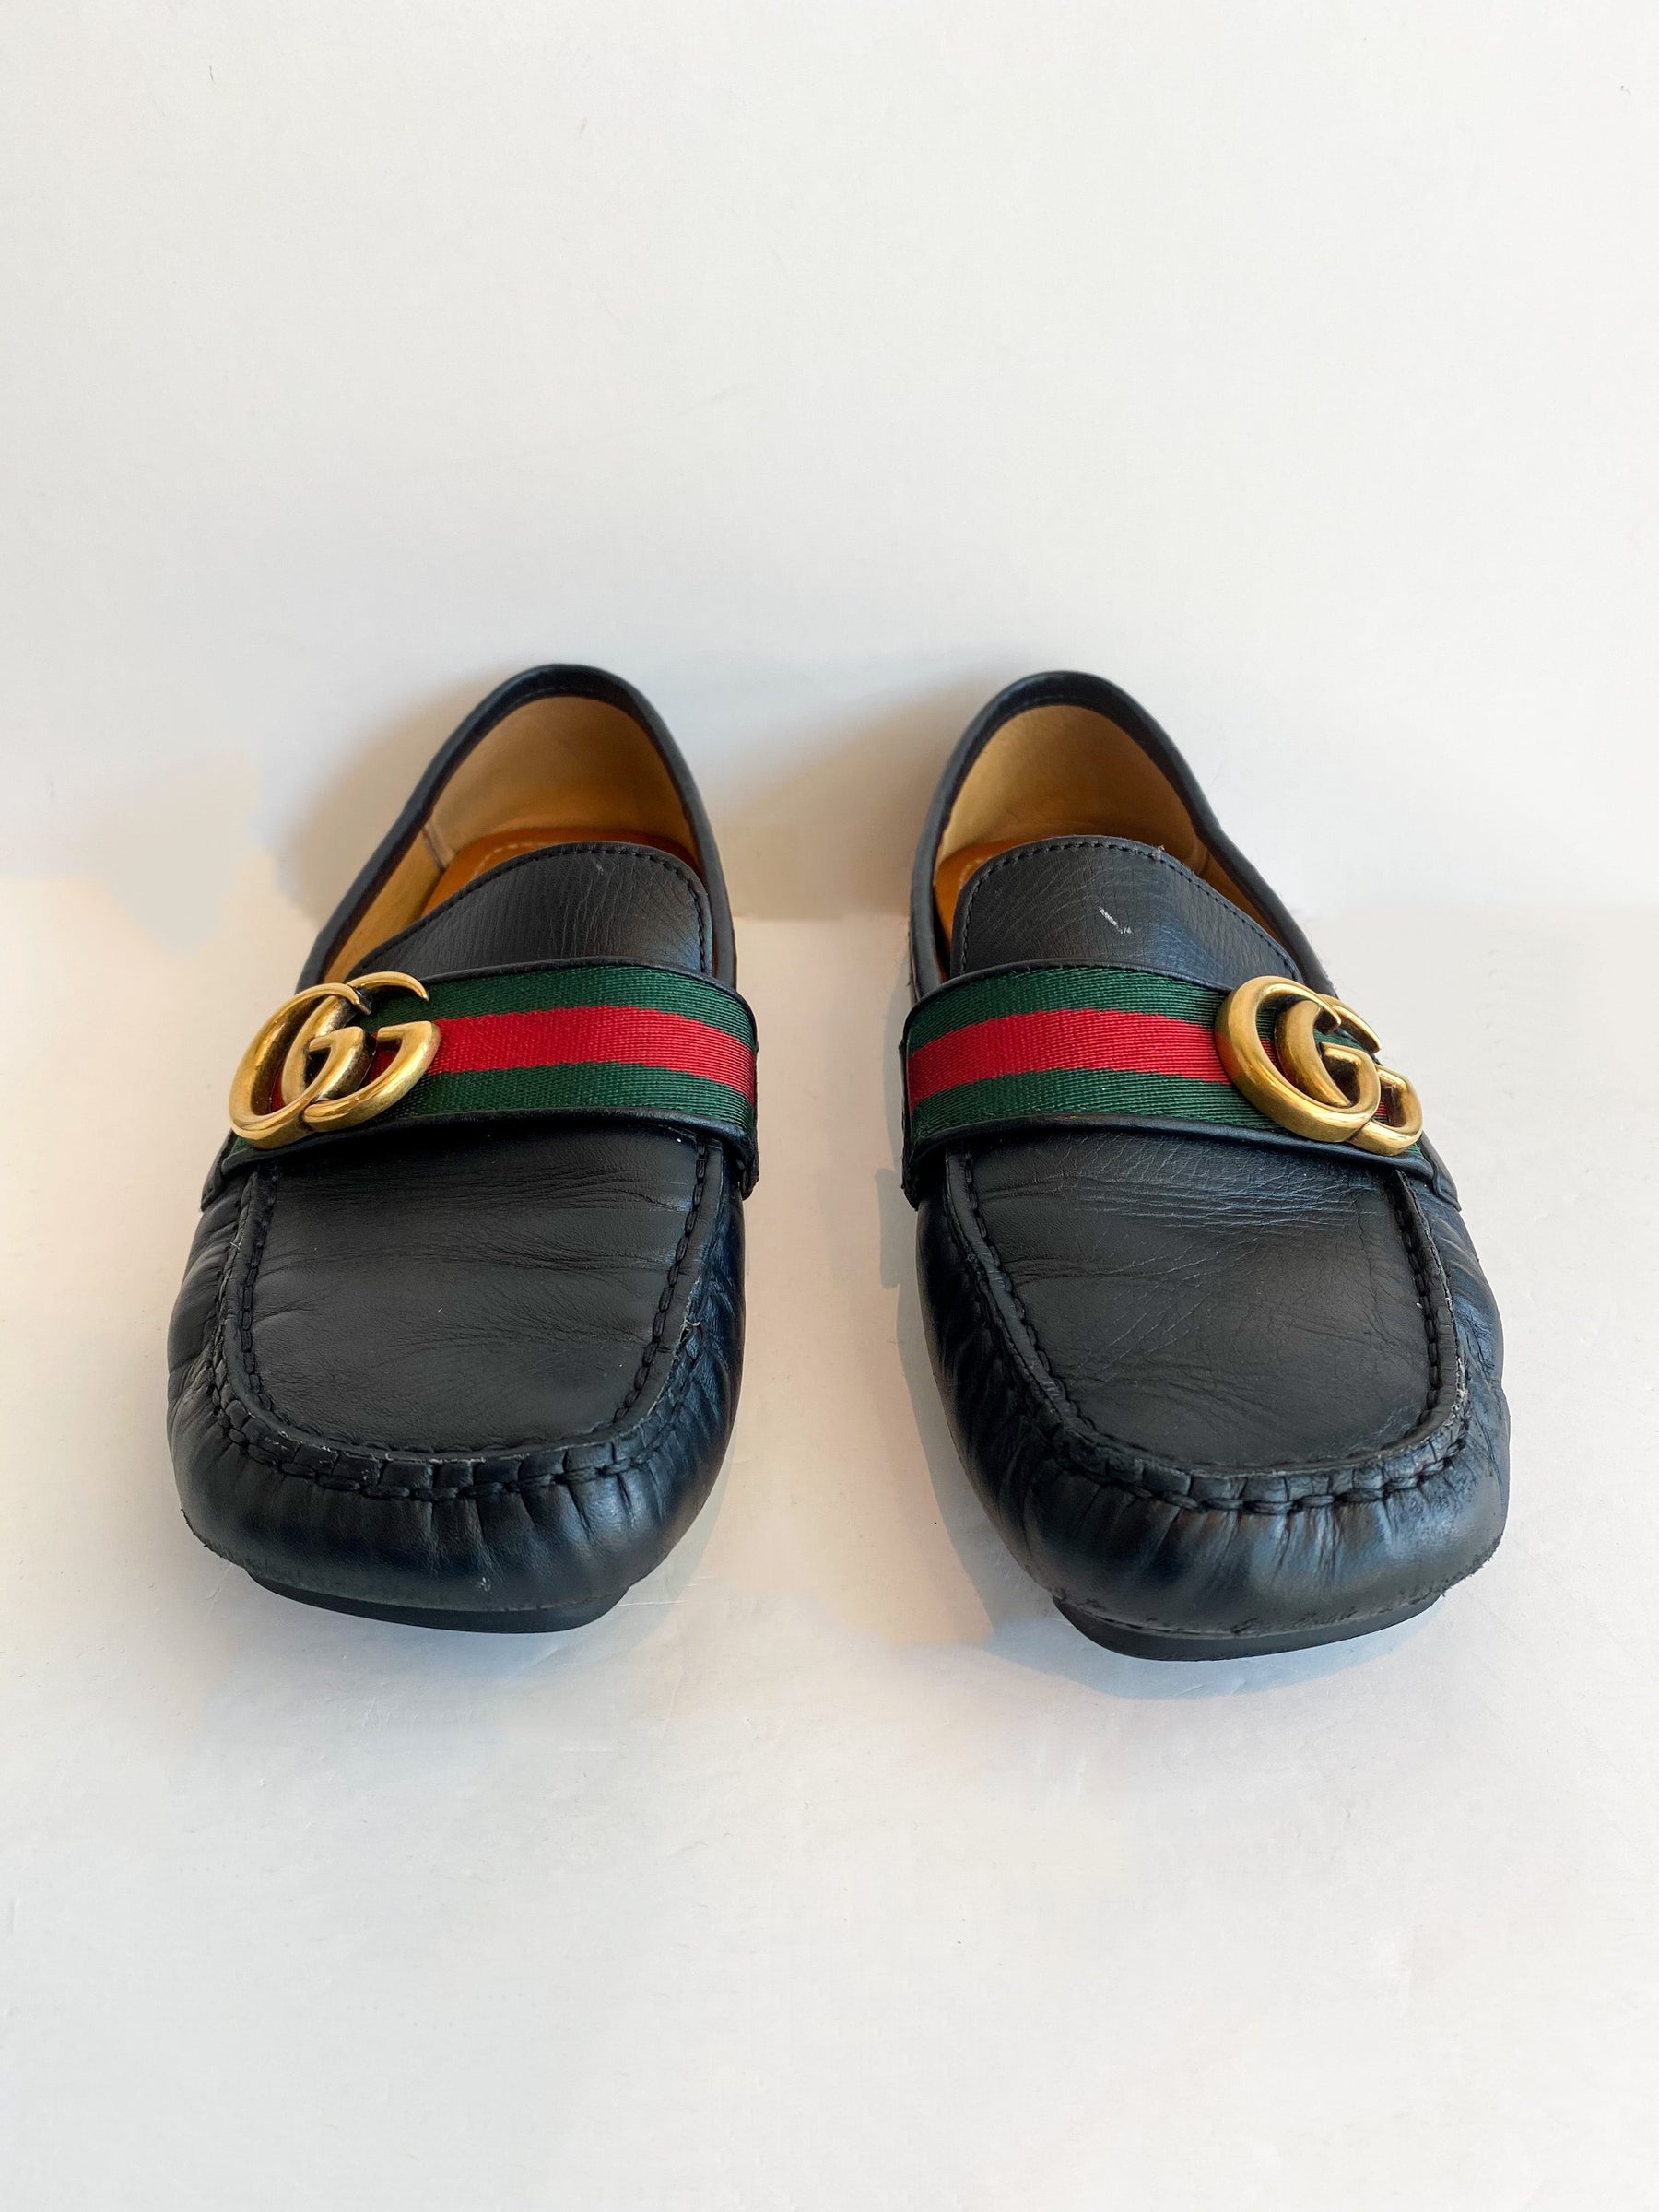 Gucci Logo Loafers Leather Black Gold Red Green Stripe Front of shoes